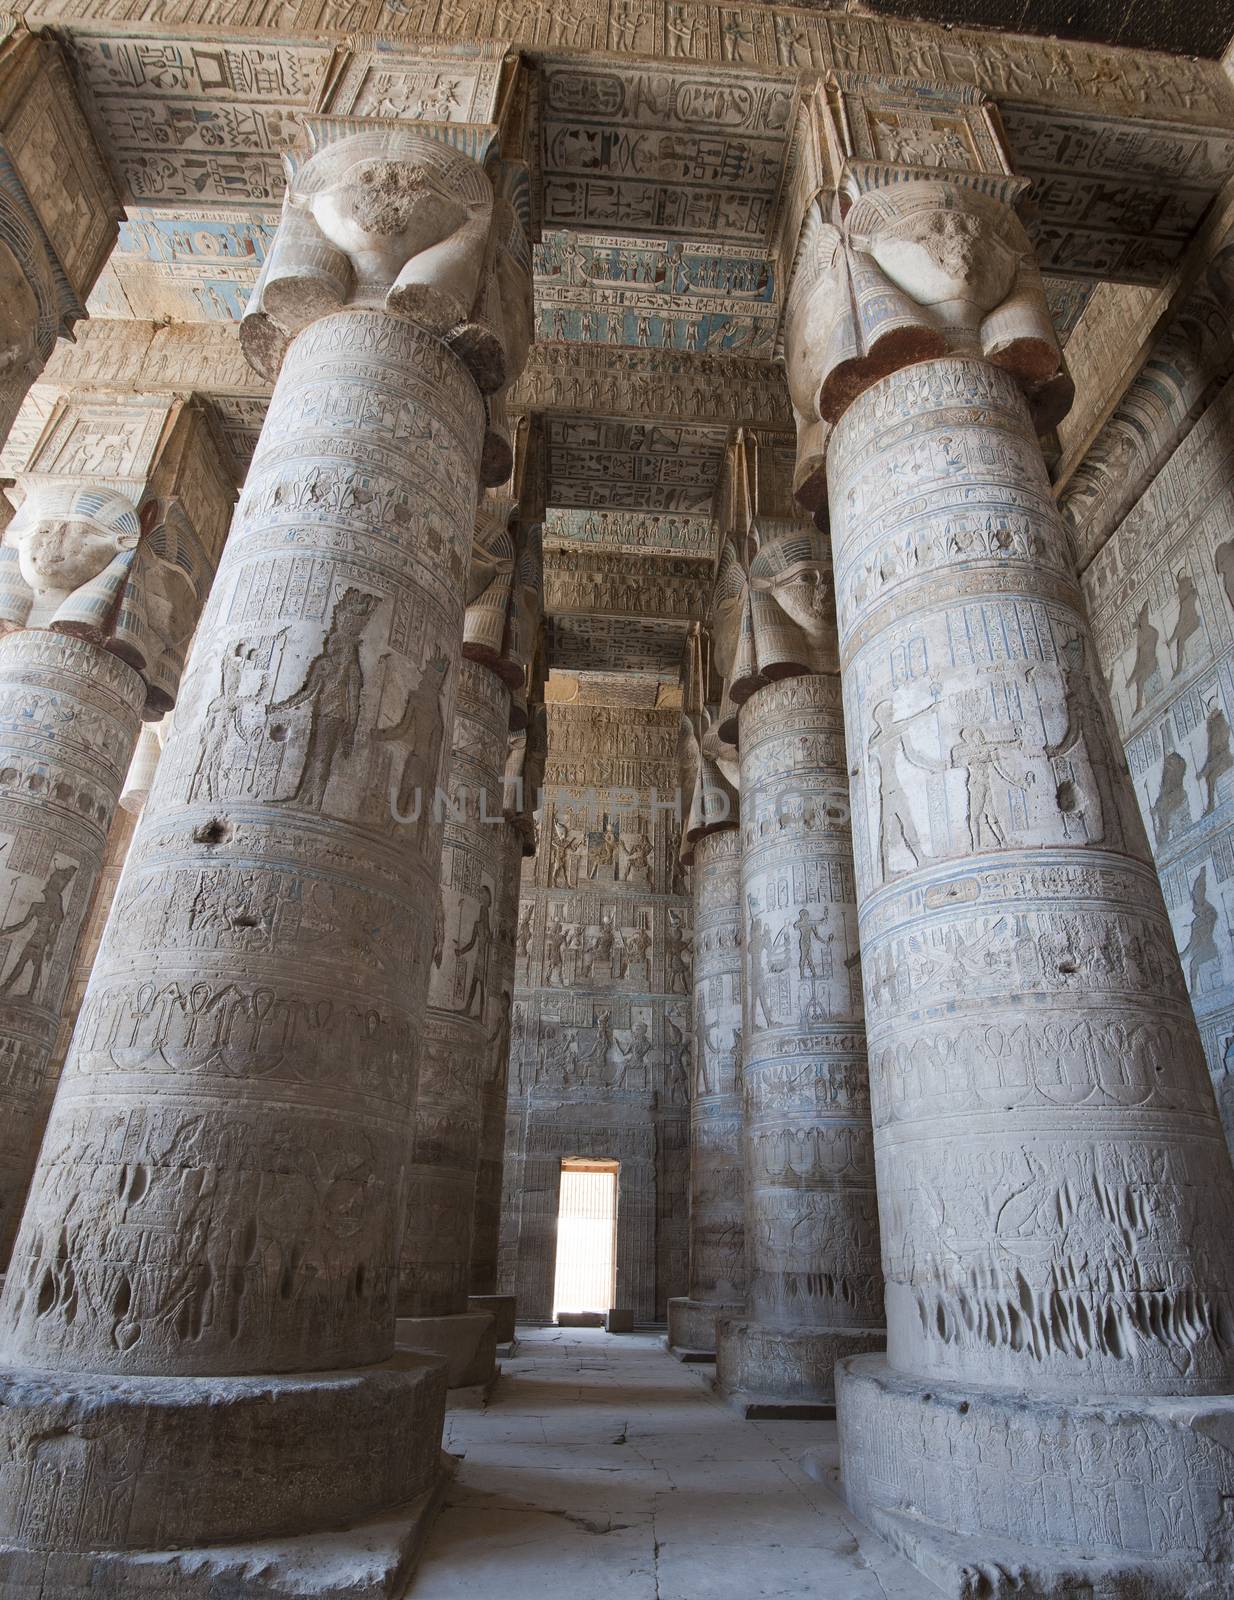 Columns inside an ancient egyptian temple covered in hieroglyphic carvings and paintings